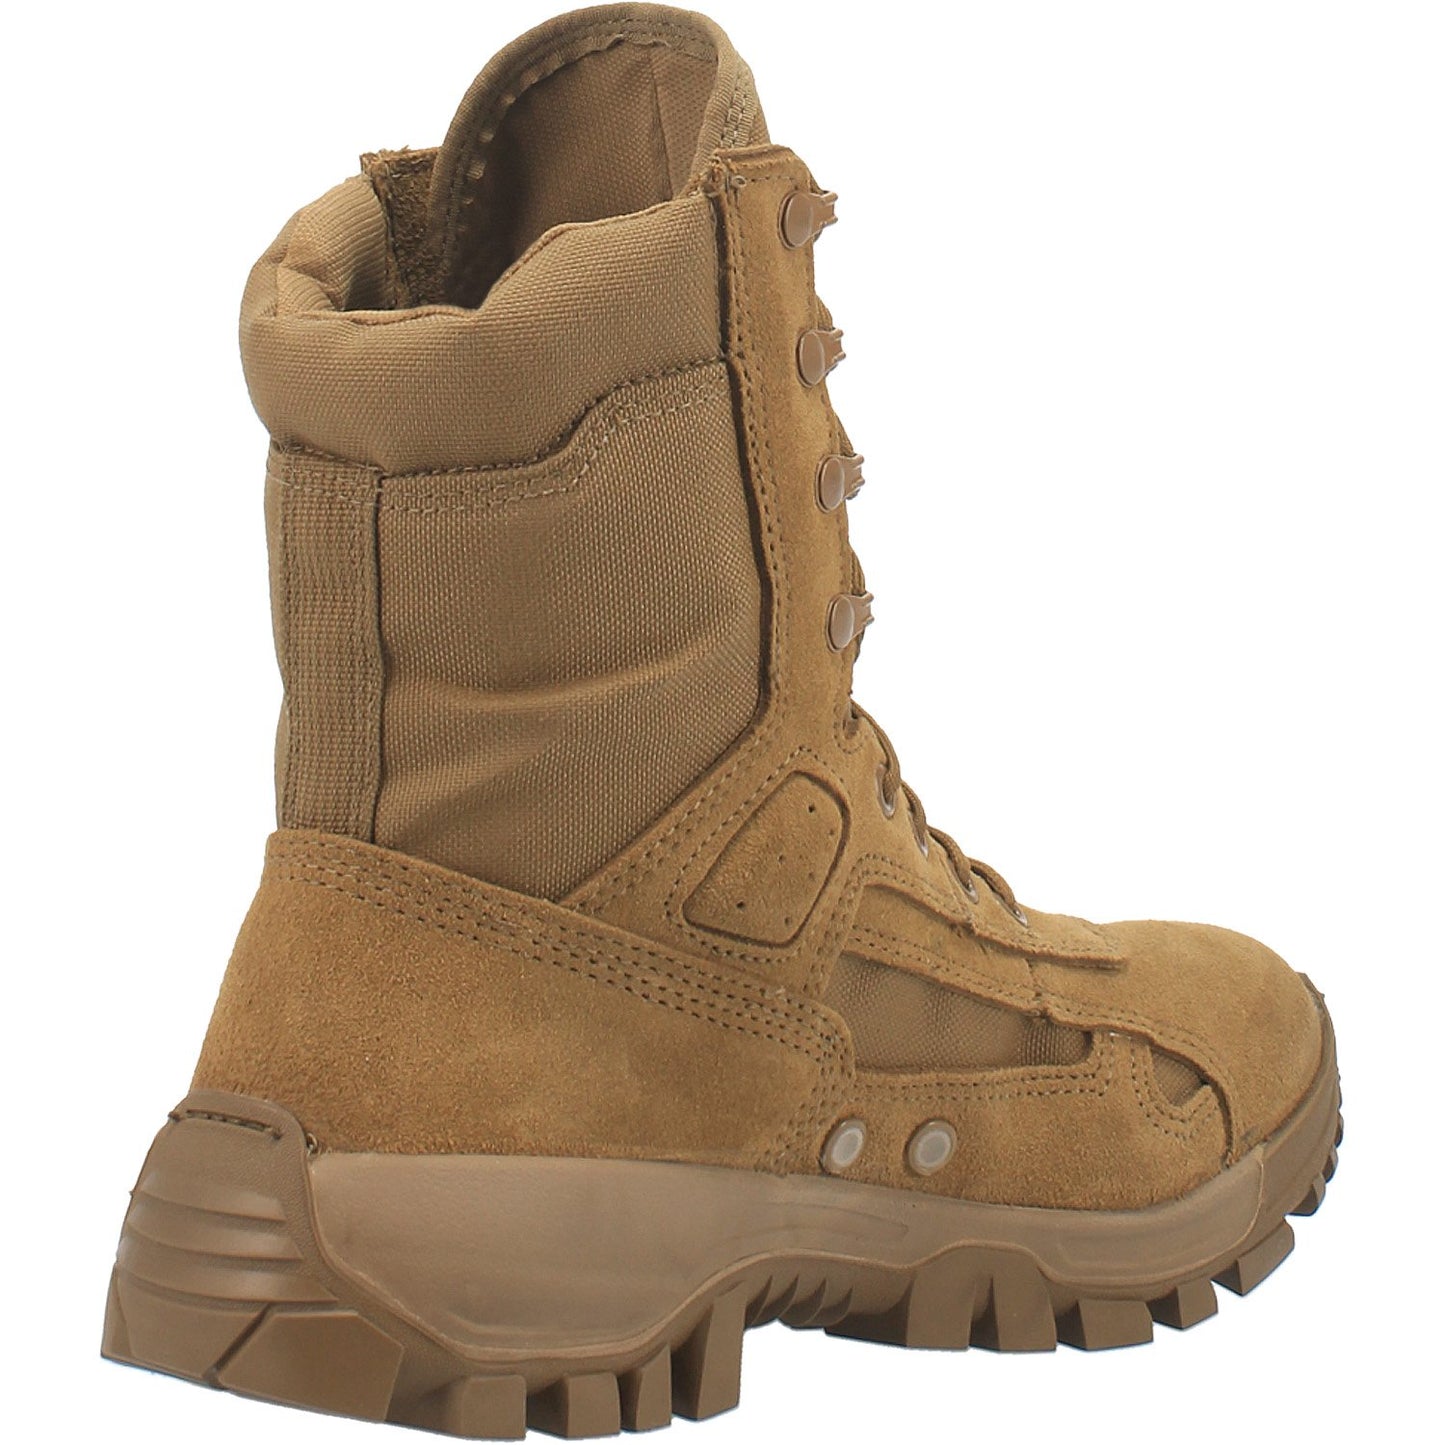 MCRAE Terassault T1 Hot Weather Leather Coyote Combat Boots